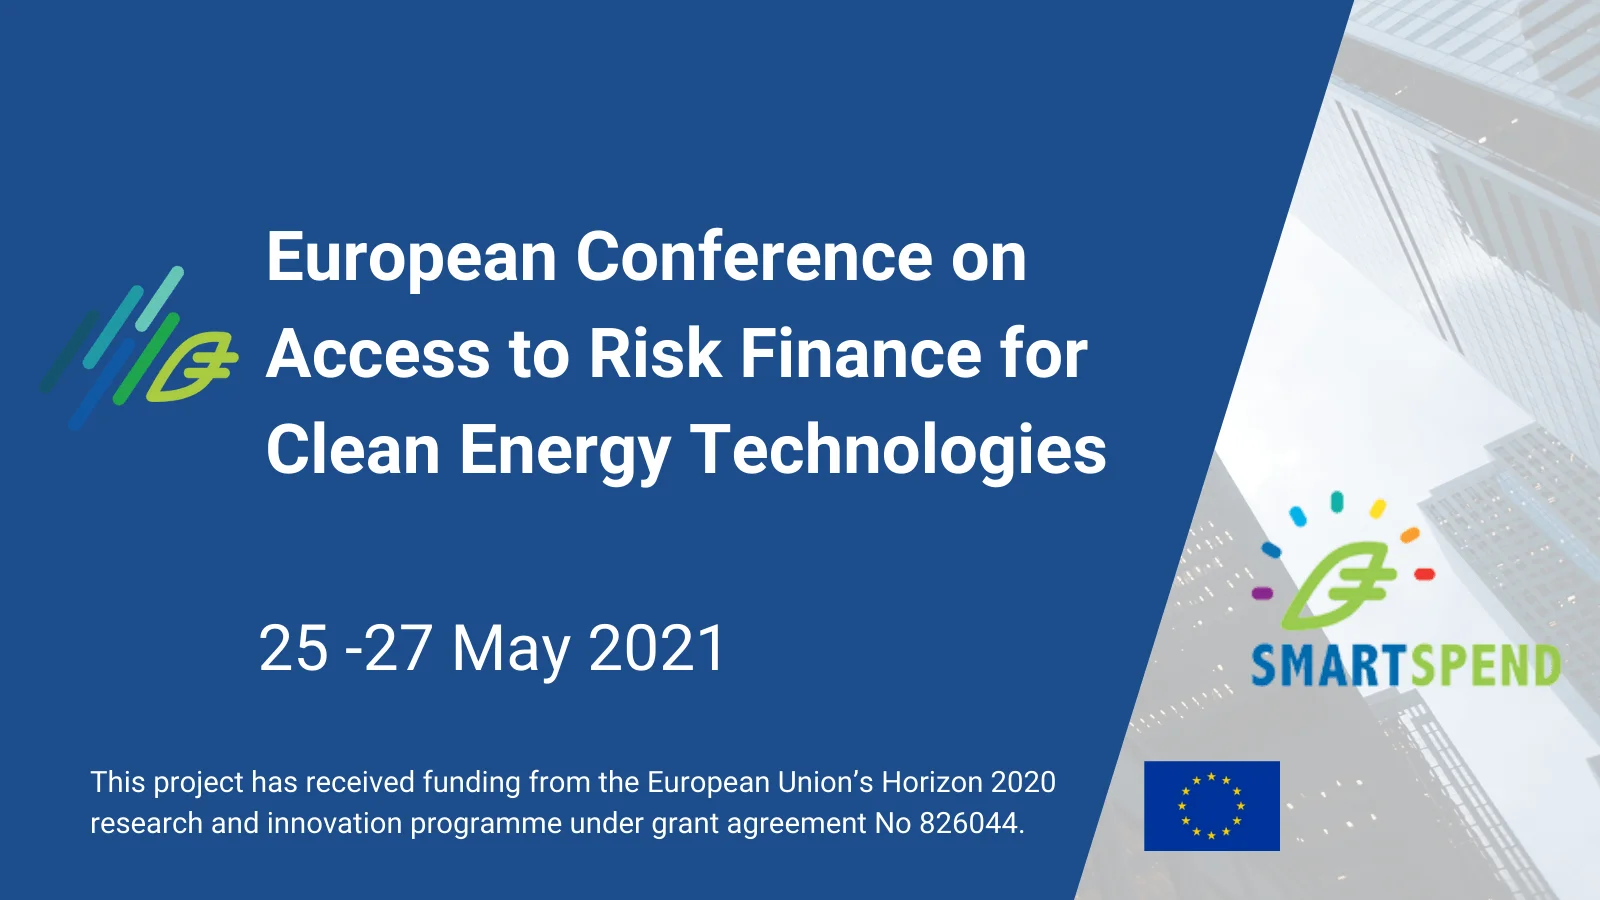 EU Conference on Access to Risk Finance for Clean Energy Technologies